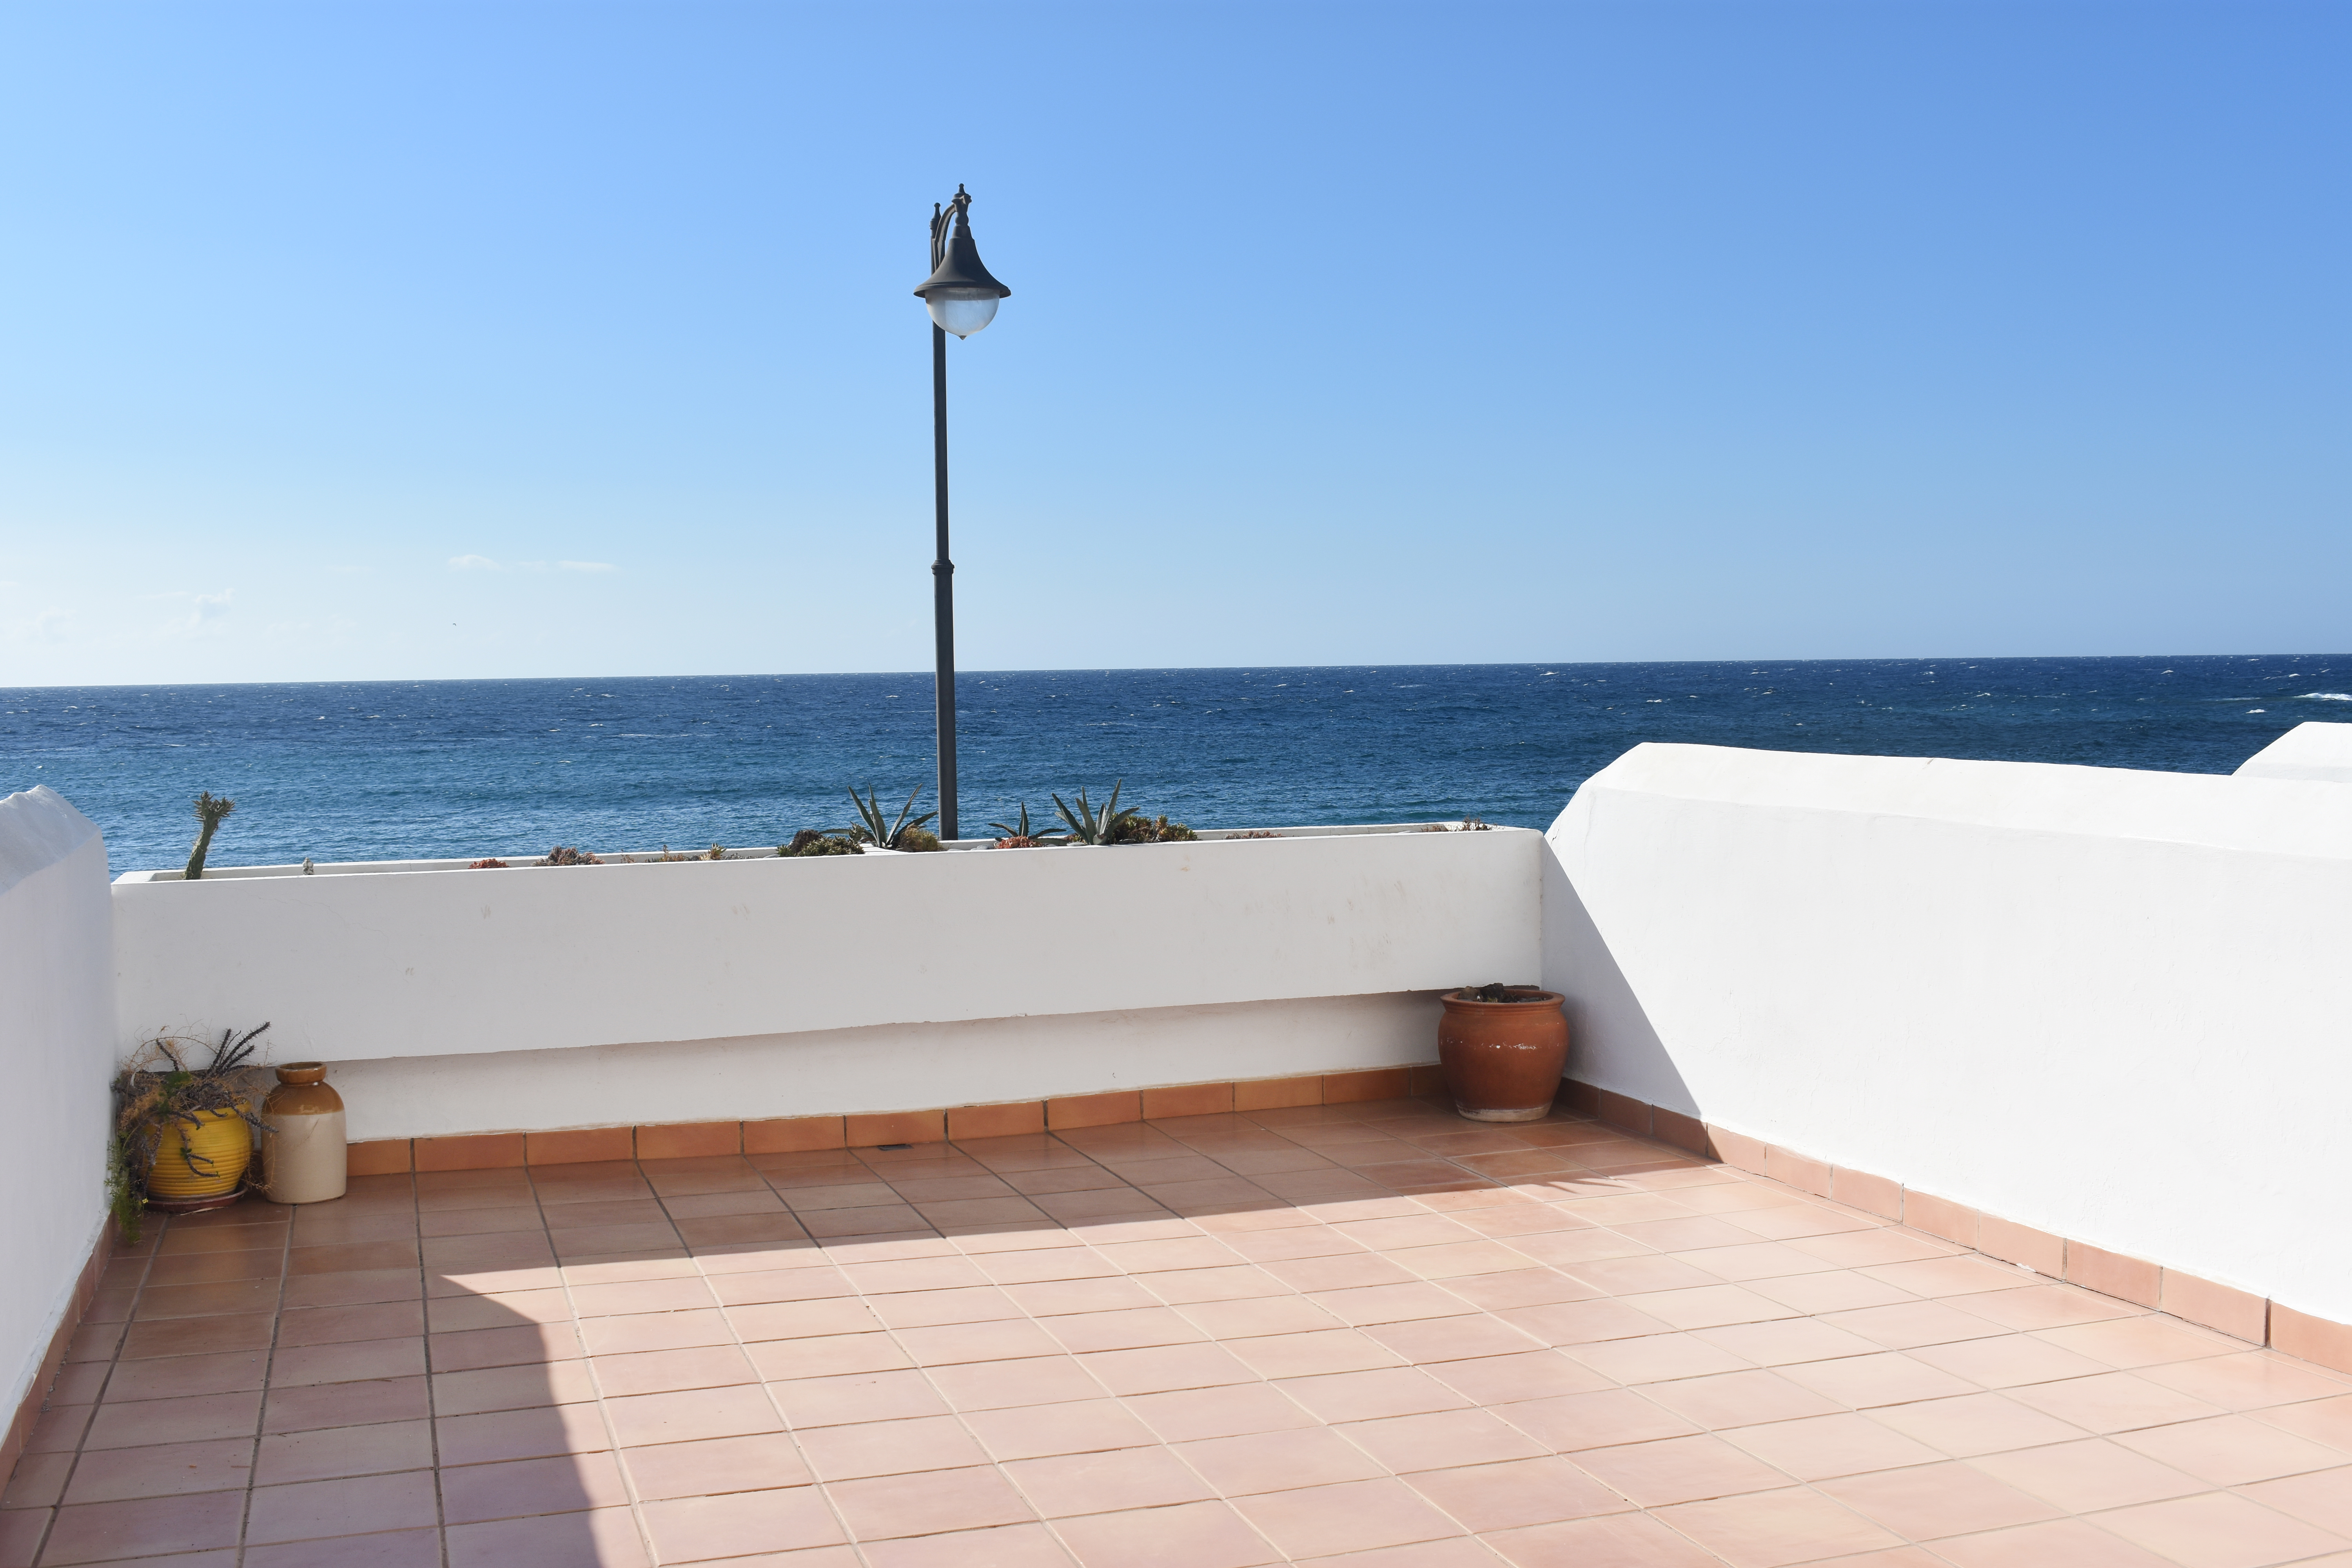 Apartment in San Miguel de Tajao marketed by Tenerife Property Shop